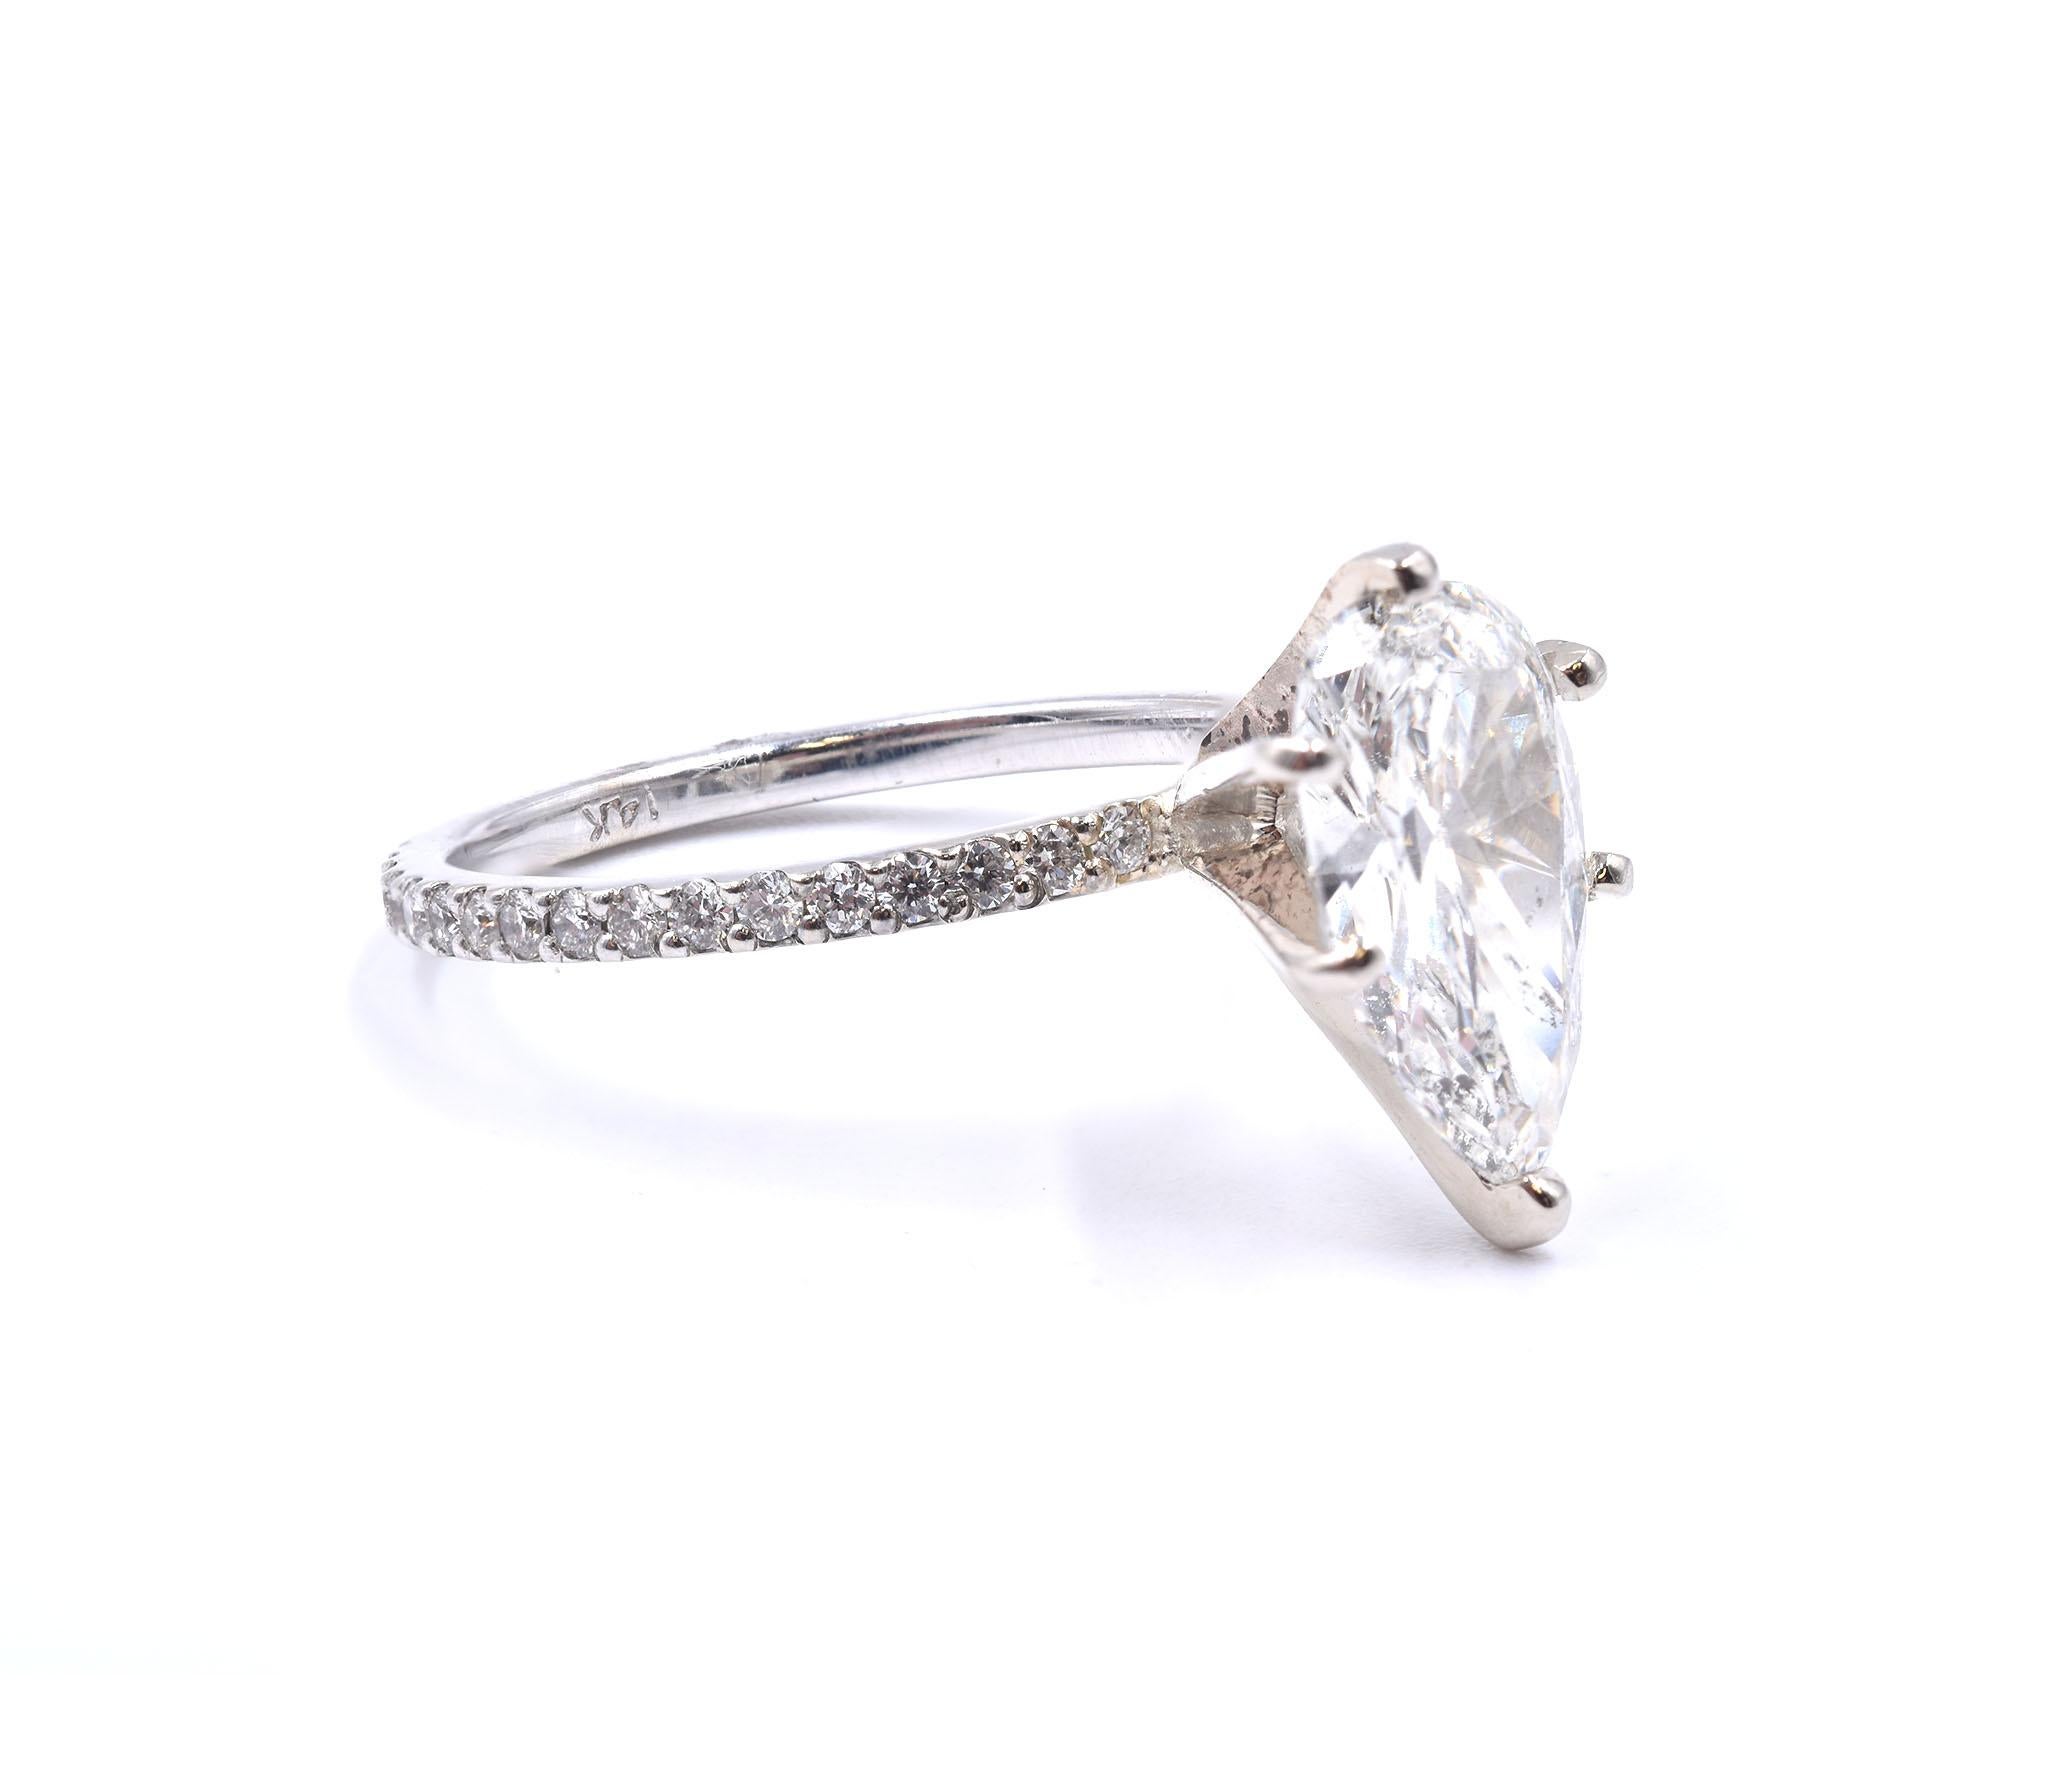 Material: 14K white gold
Center Diamond: 1 pear cut = 1.75ct
Color: J
Clarity: SI2
Diamond: 12 round cut = .50cttw
Color: G
Clarity: VS
Ring Size: 6.5 (please allow up to 2 additional business days for sizing requests)
Dimensions: ring shank